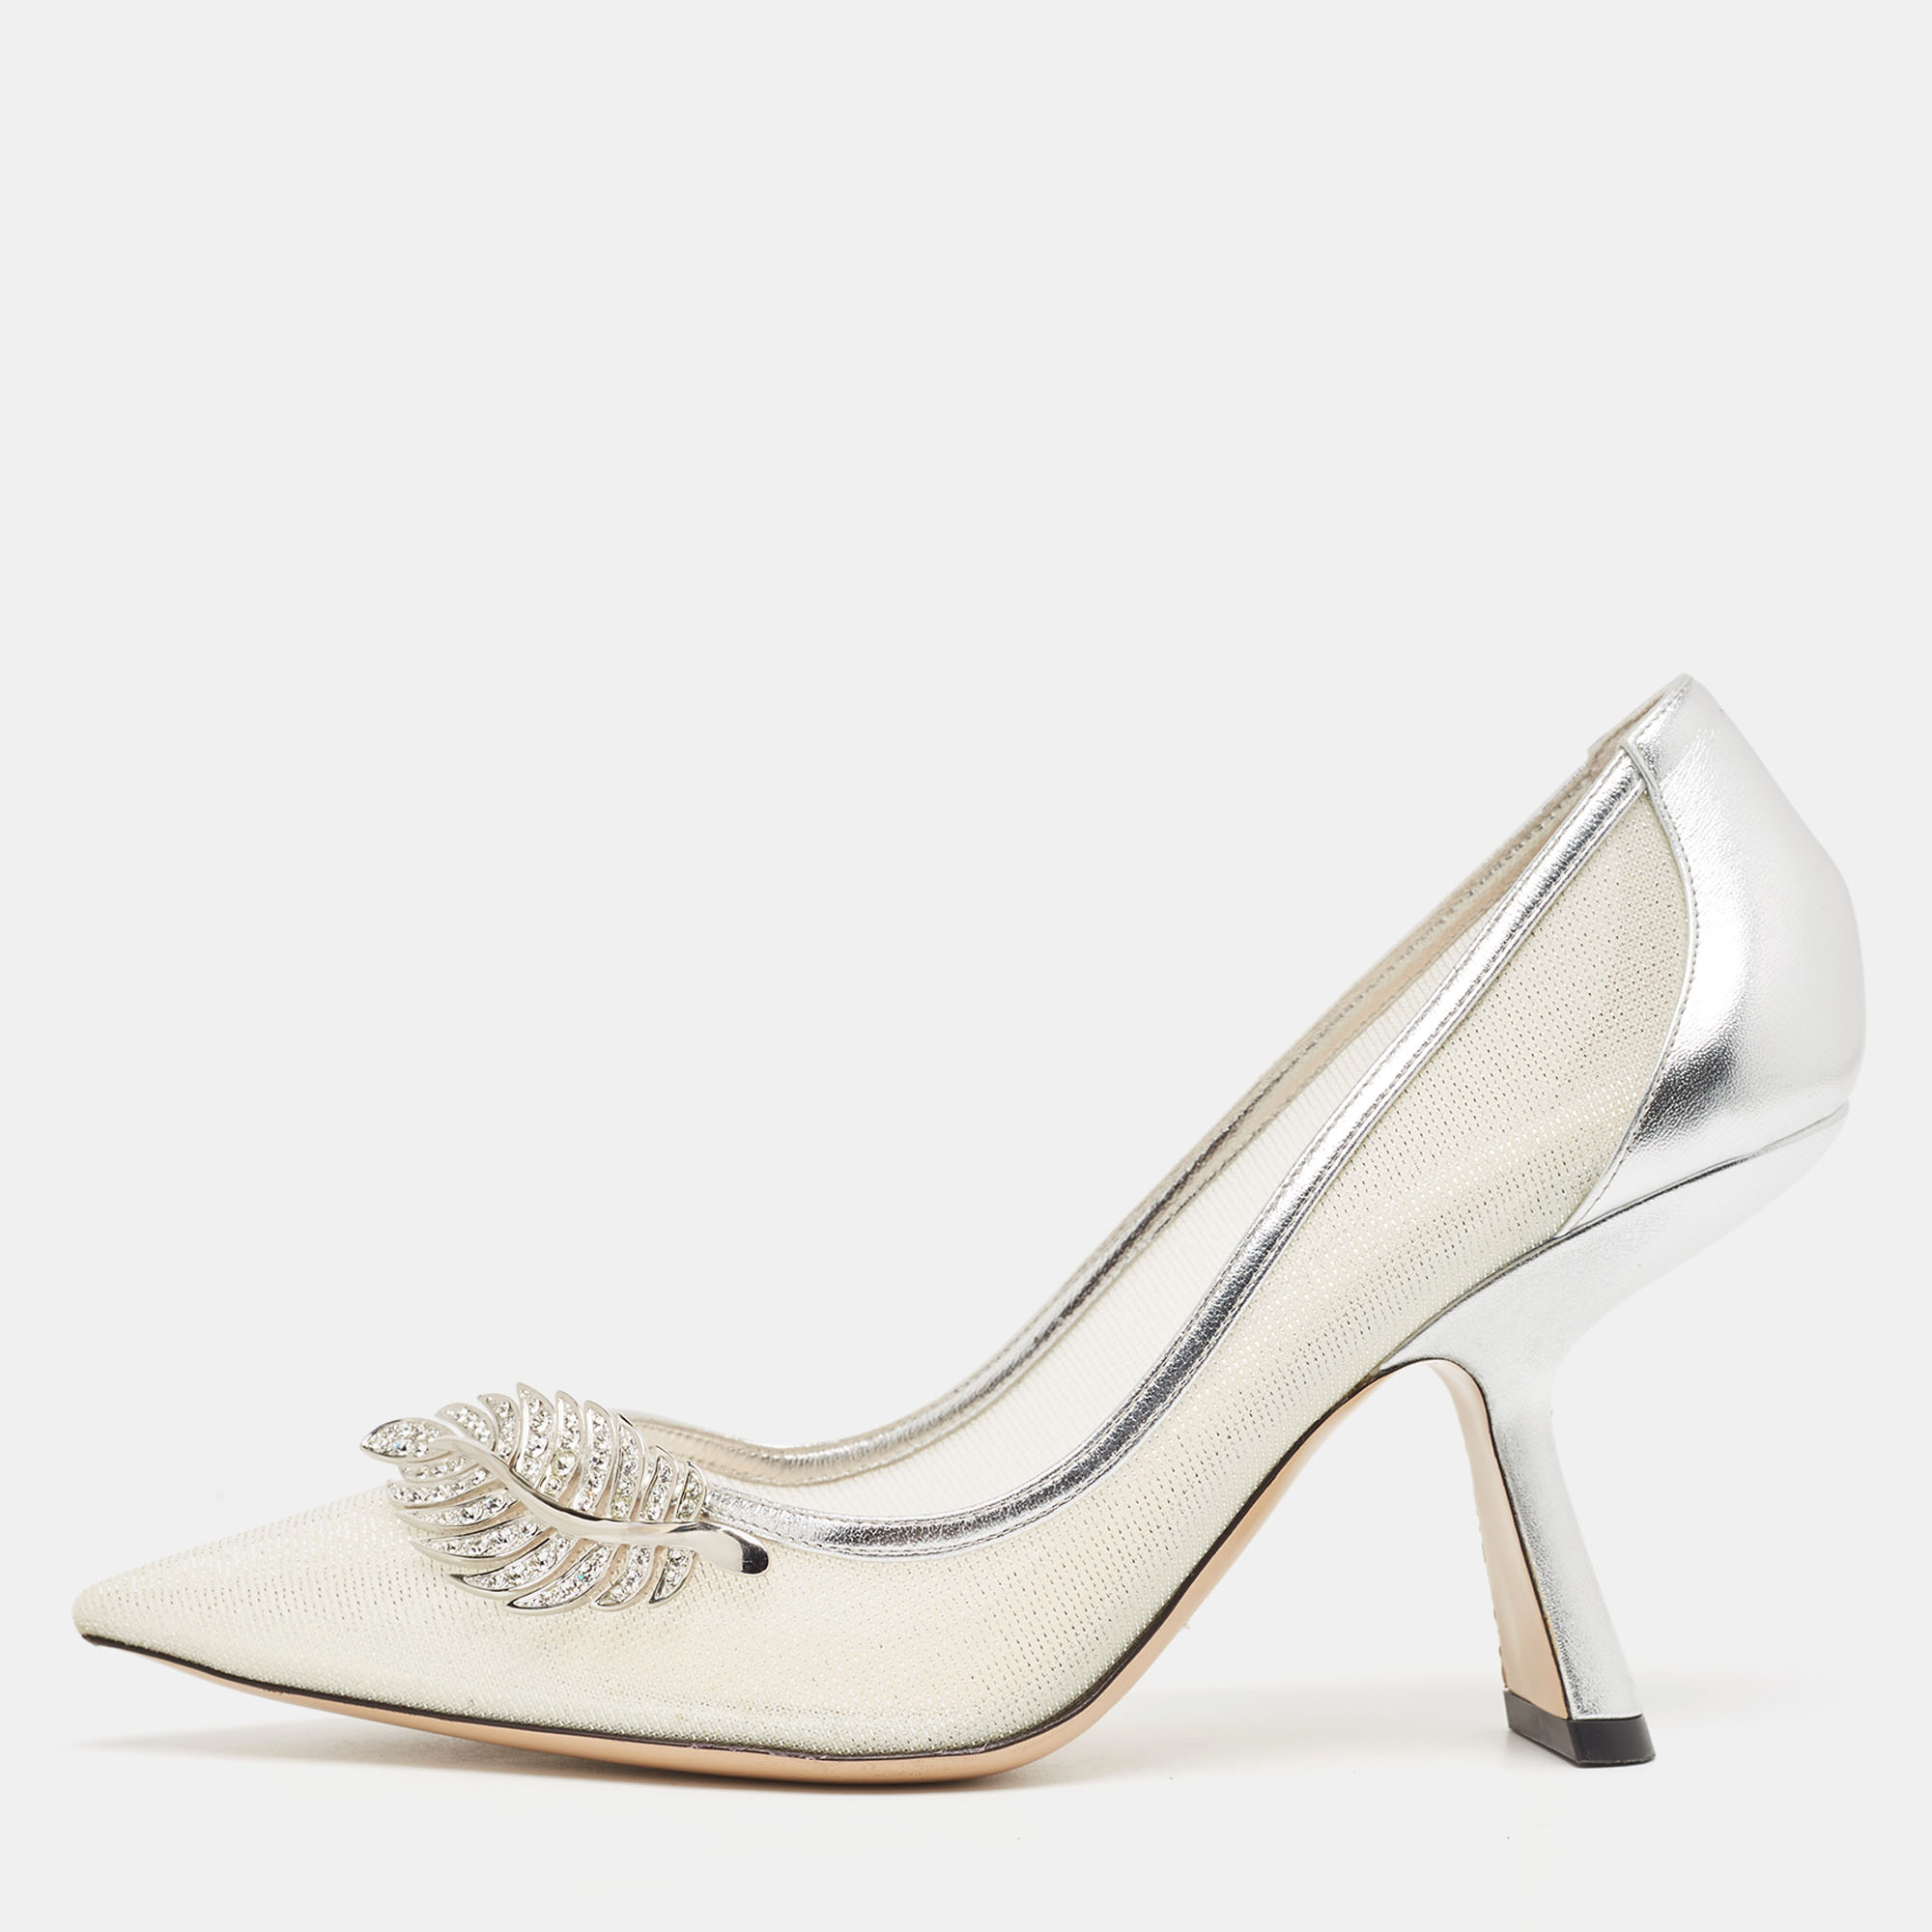 Nicholas kirkwood silver leather and mesh monstera pumps size 39